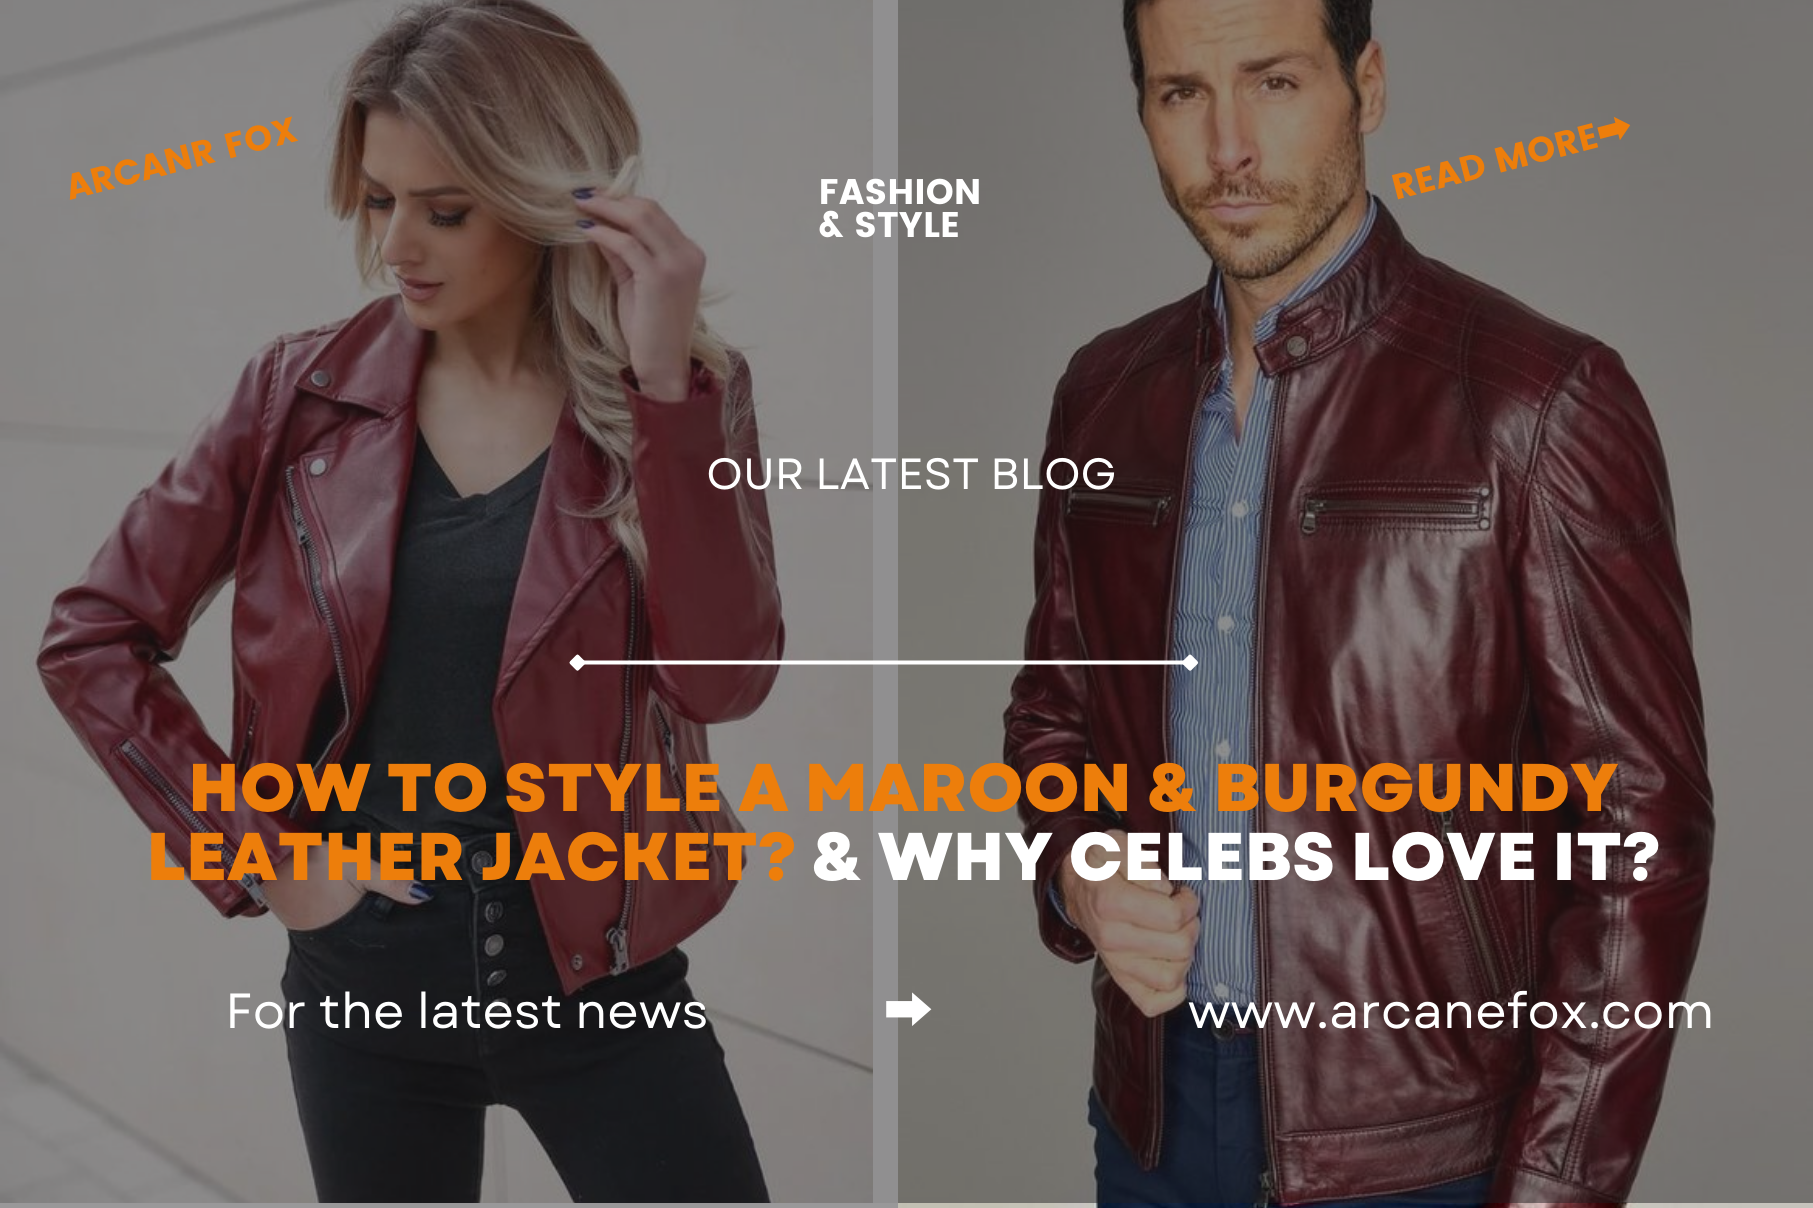 How to Style A Maroon & Burgundy Leather Jacket?